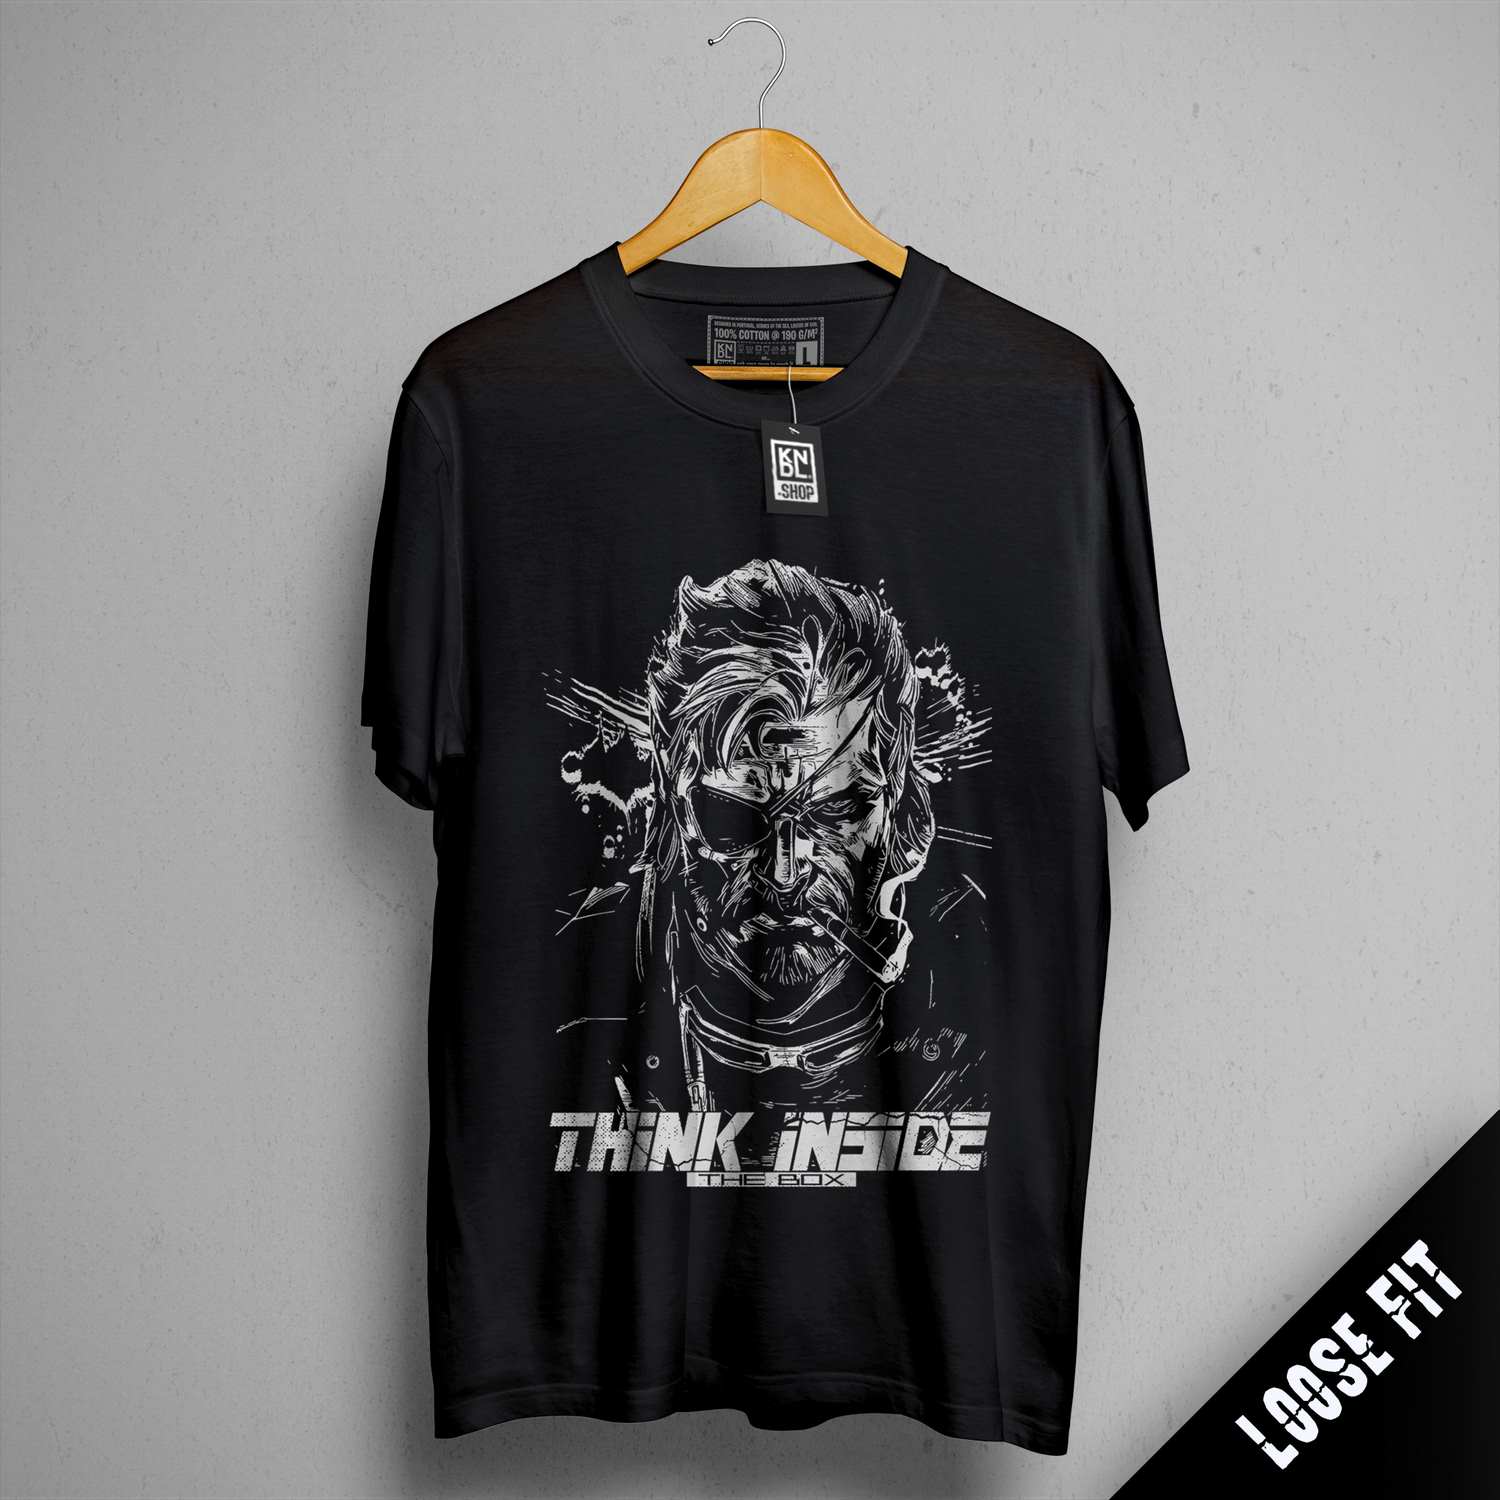 a black t - shirt with the words think inside on it